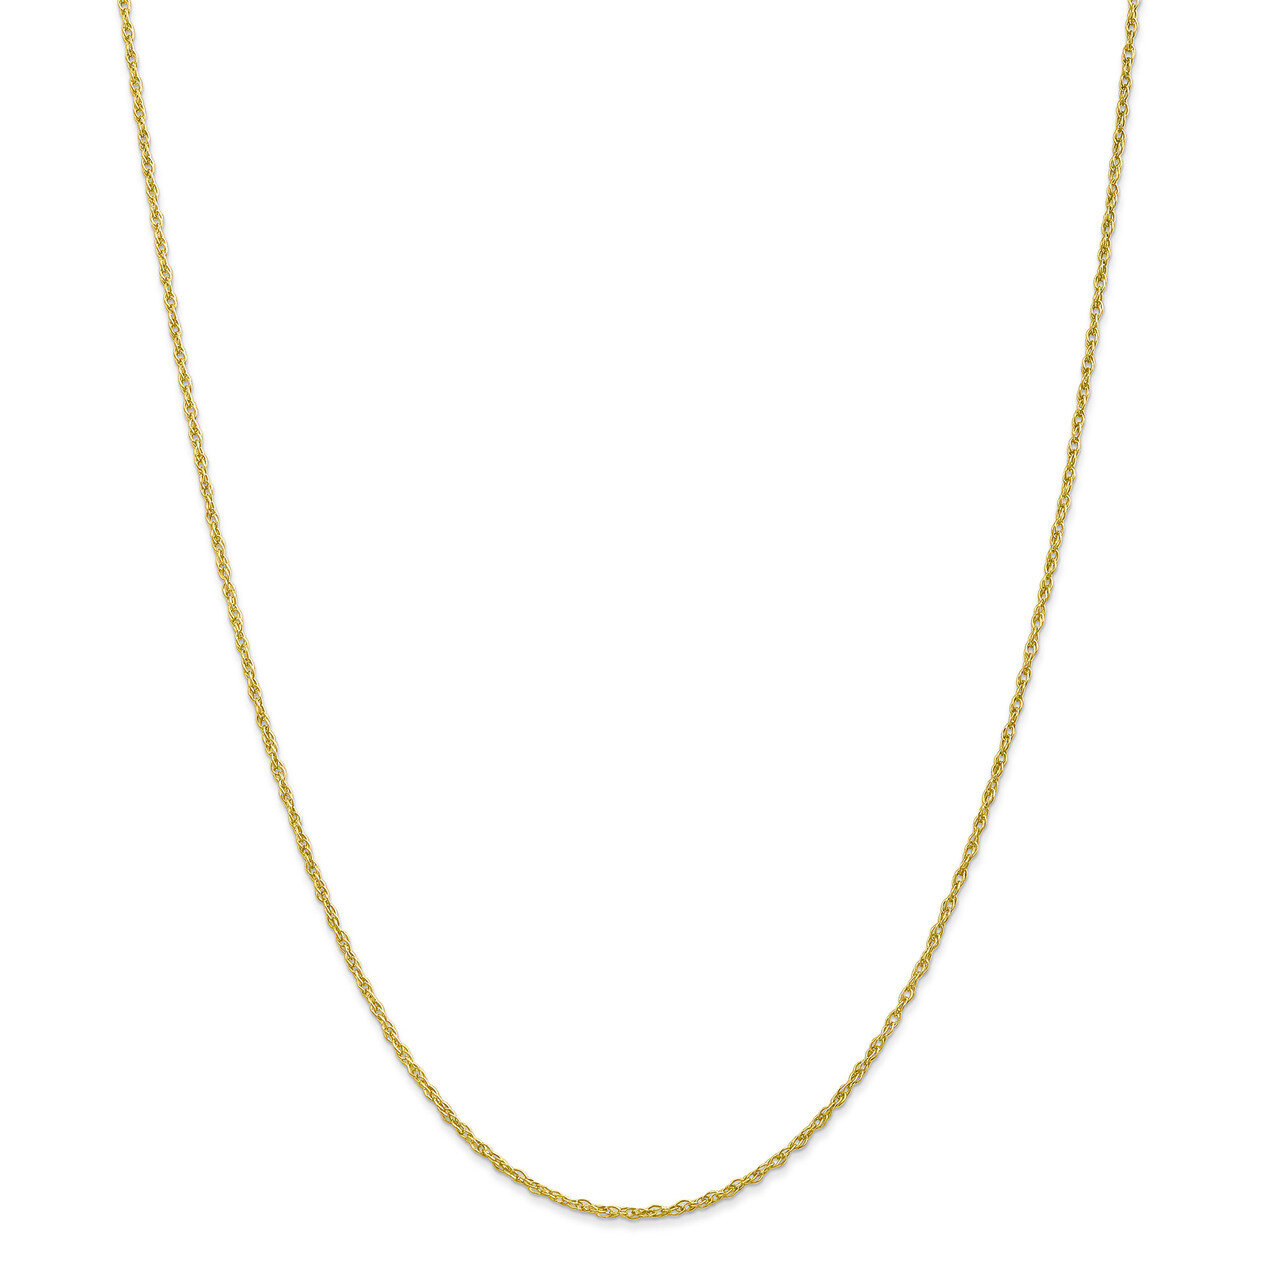 1.5 mm Loose Rope Chain 18 Inch 10k Gold HB-5271-18